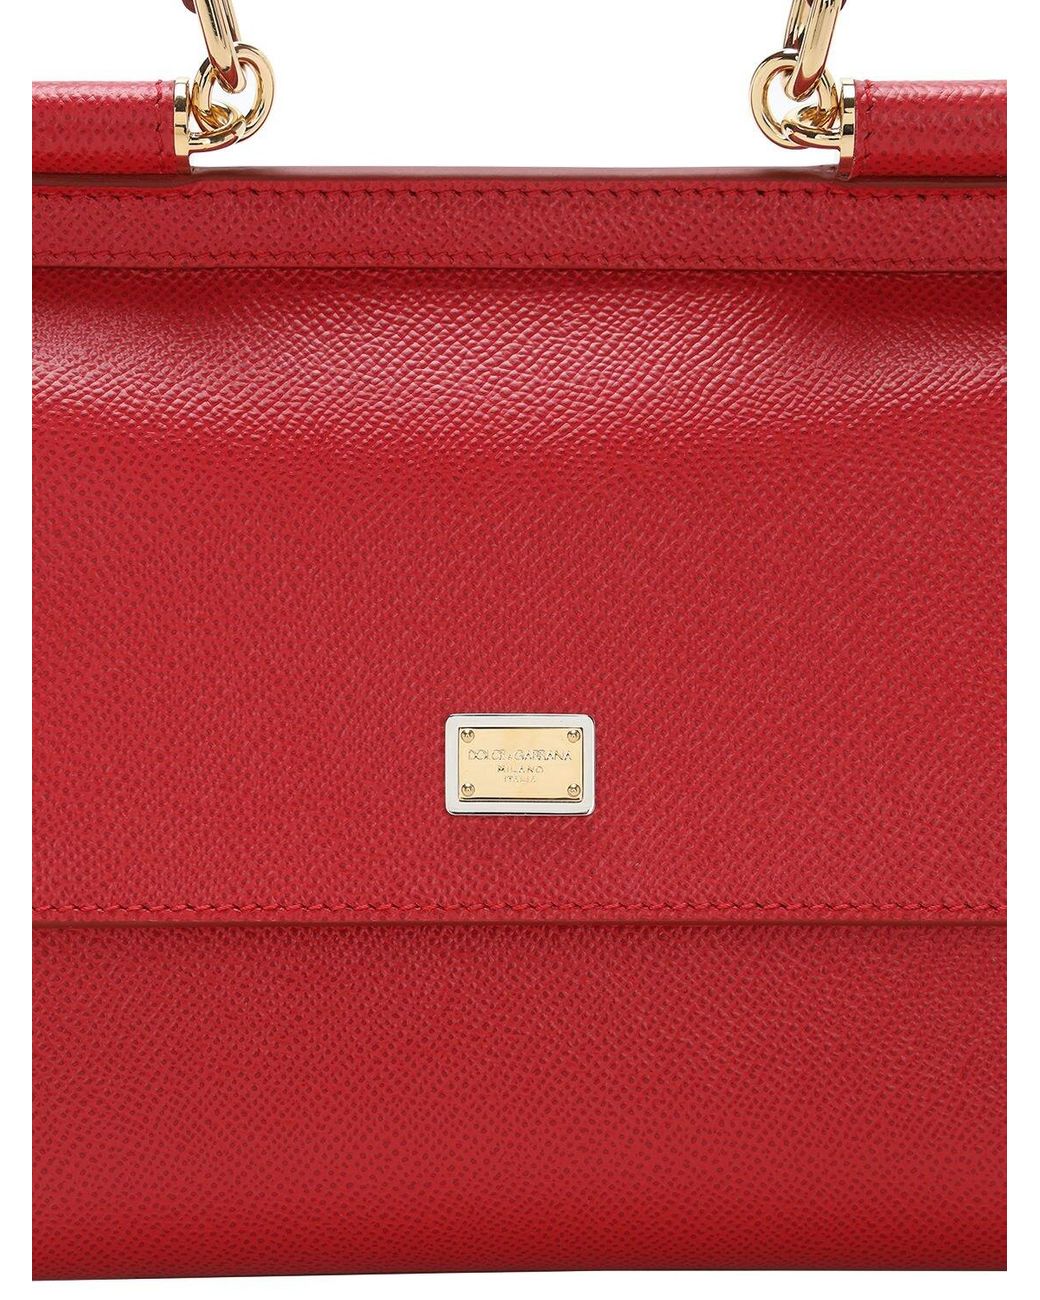 Sicily leather handbag Dolce & Gabbana Red in Leather - 32819613